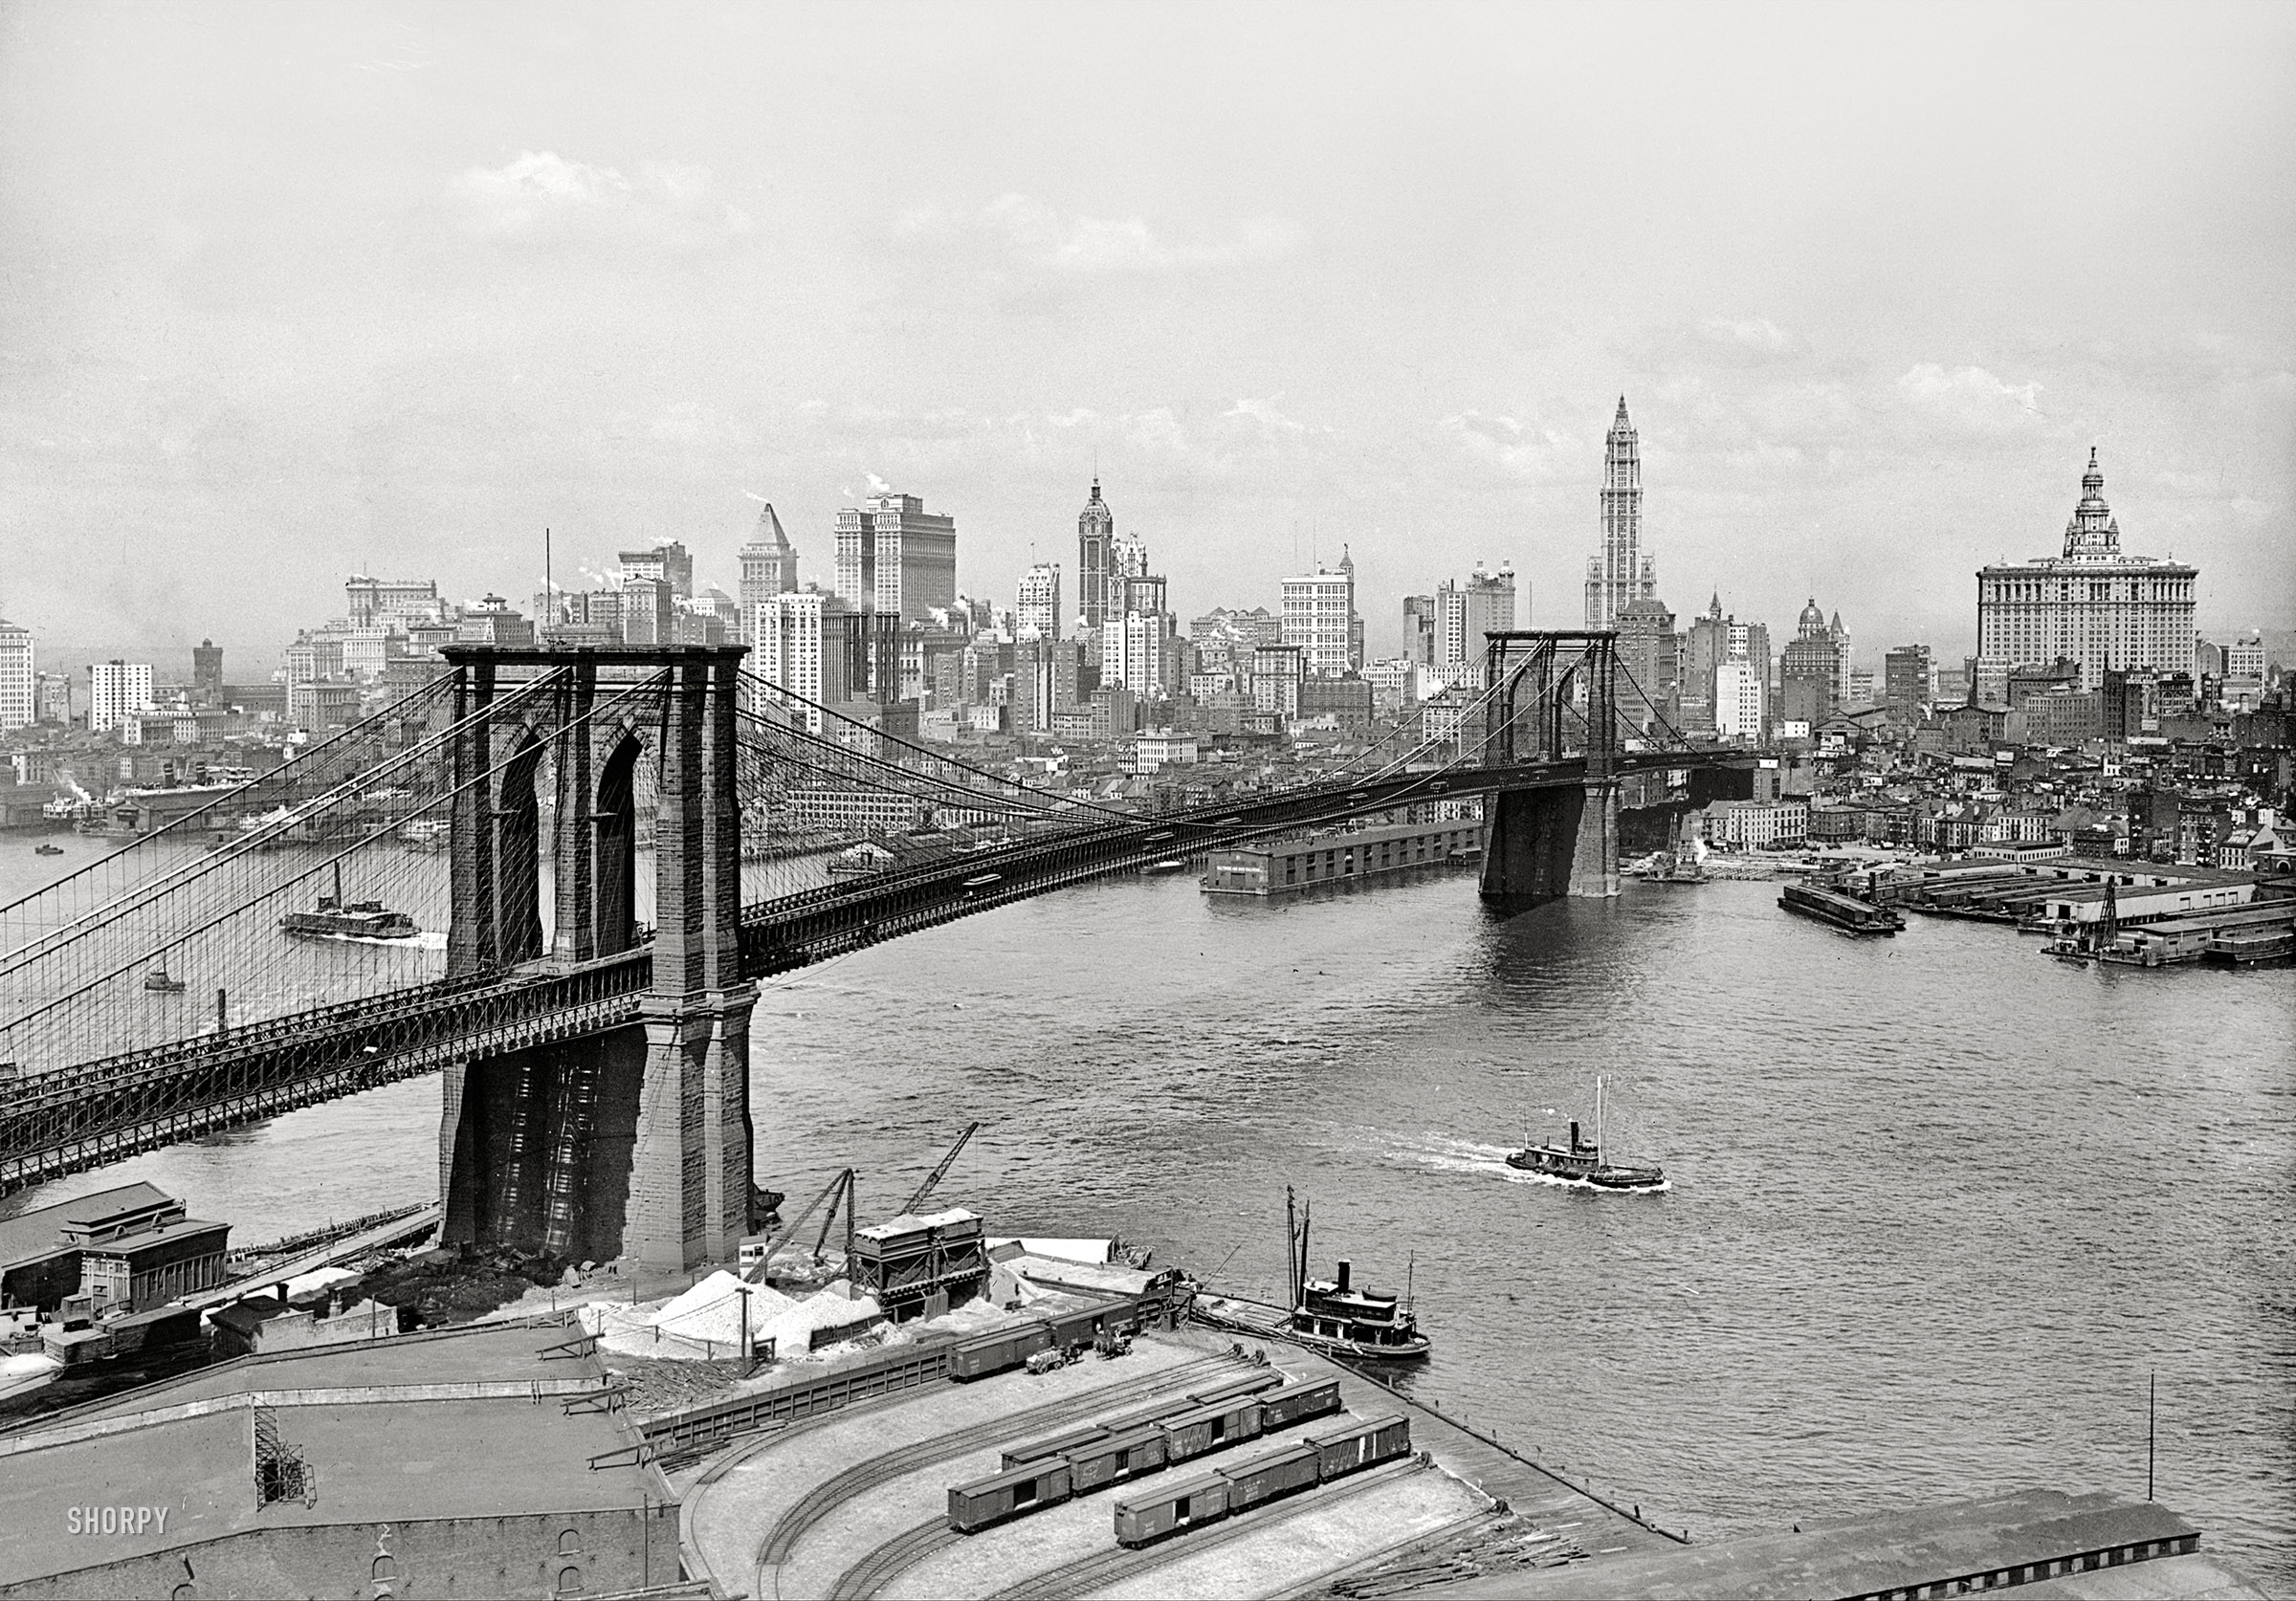 New York circa 1915. "Brooklyn Bridge, East River and skyline." The Woolworth Building stars in this Lower Manhattan view, with the Singer, Bankers Trust, Hudson Terminal, Municipal and Park Row buildings as understudies. 5x7 inch dry plate glass negative, Detroit Publishing Company. View full size.